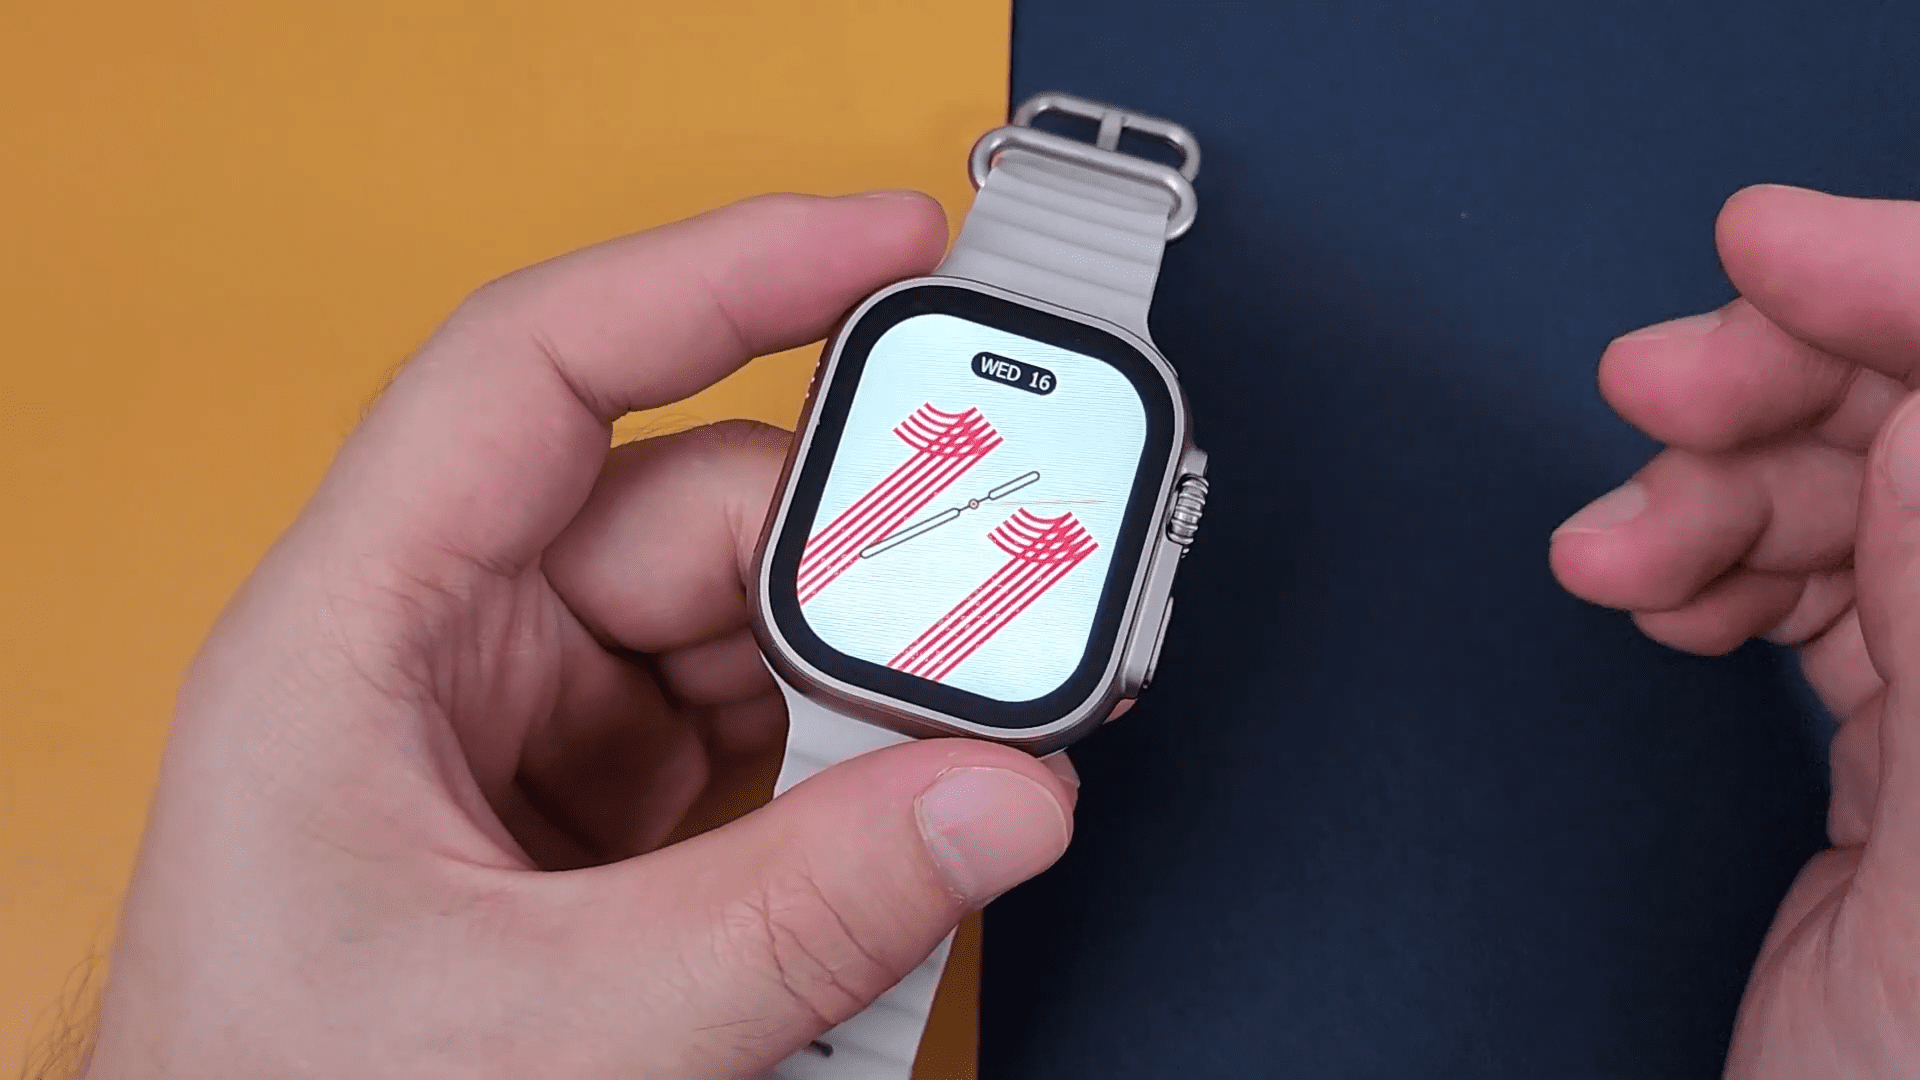 IWO Watch Ultra 2 Review - A Perfect Apple Watch Ultra Clone, But at a Hot Price